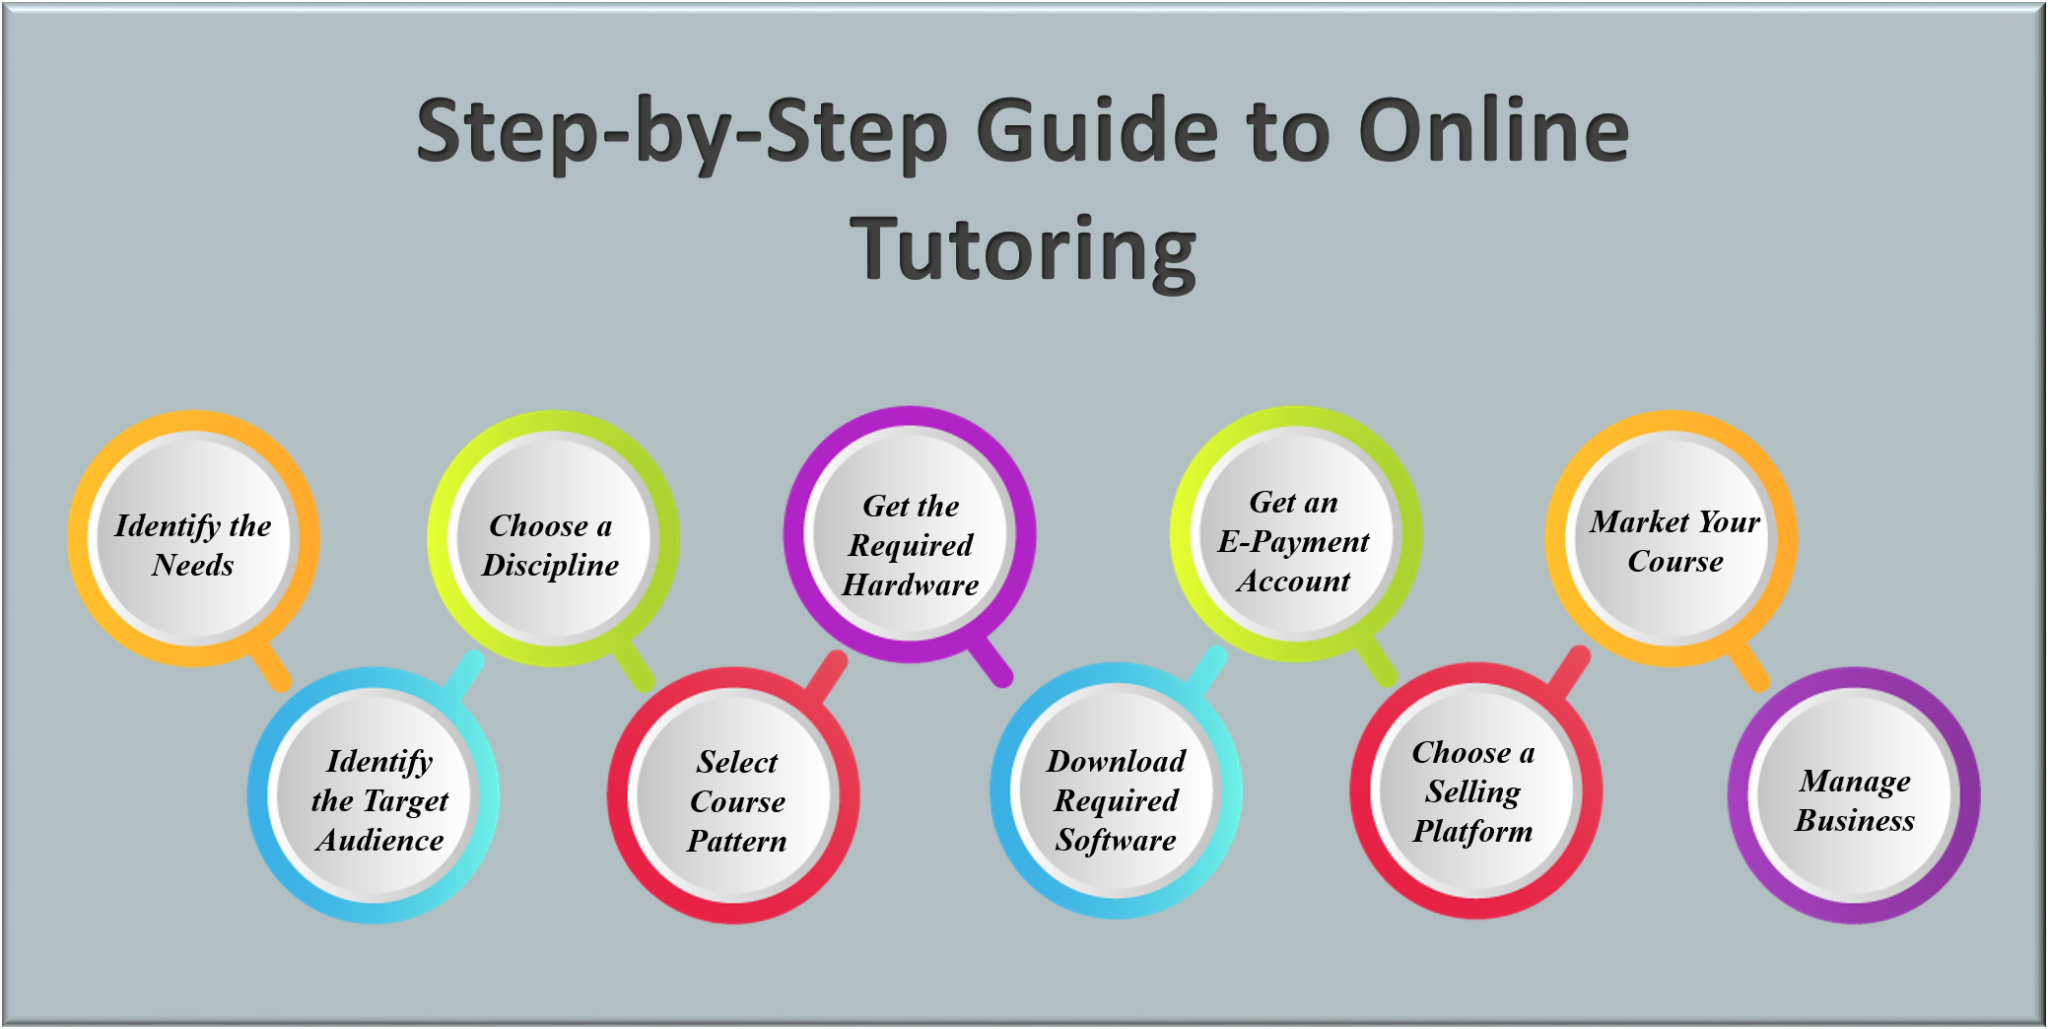 Step-by-Step Guide to Online Tutoring